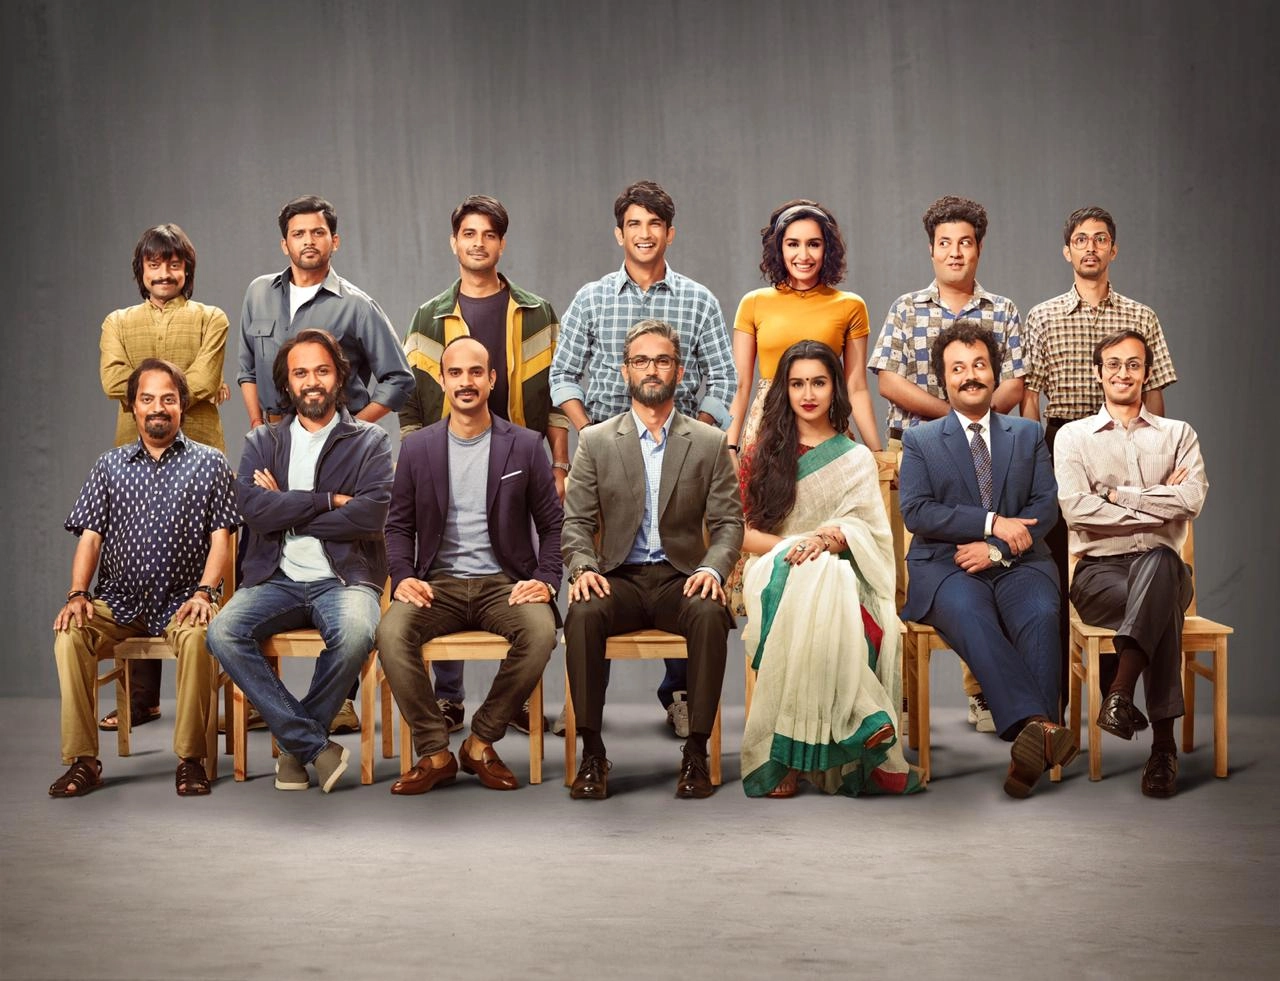 Chhichhore's 'Fikar Not' song set to create magic when young Chhichhore meets the old ones